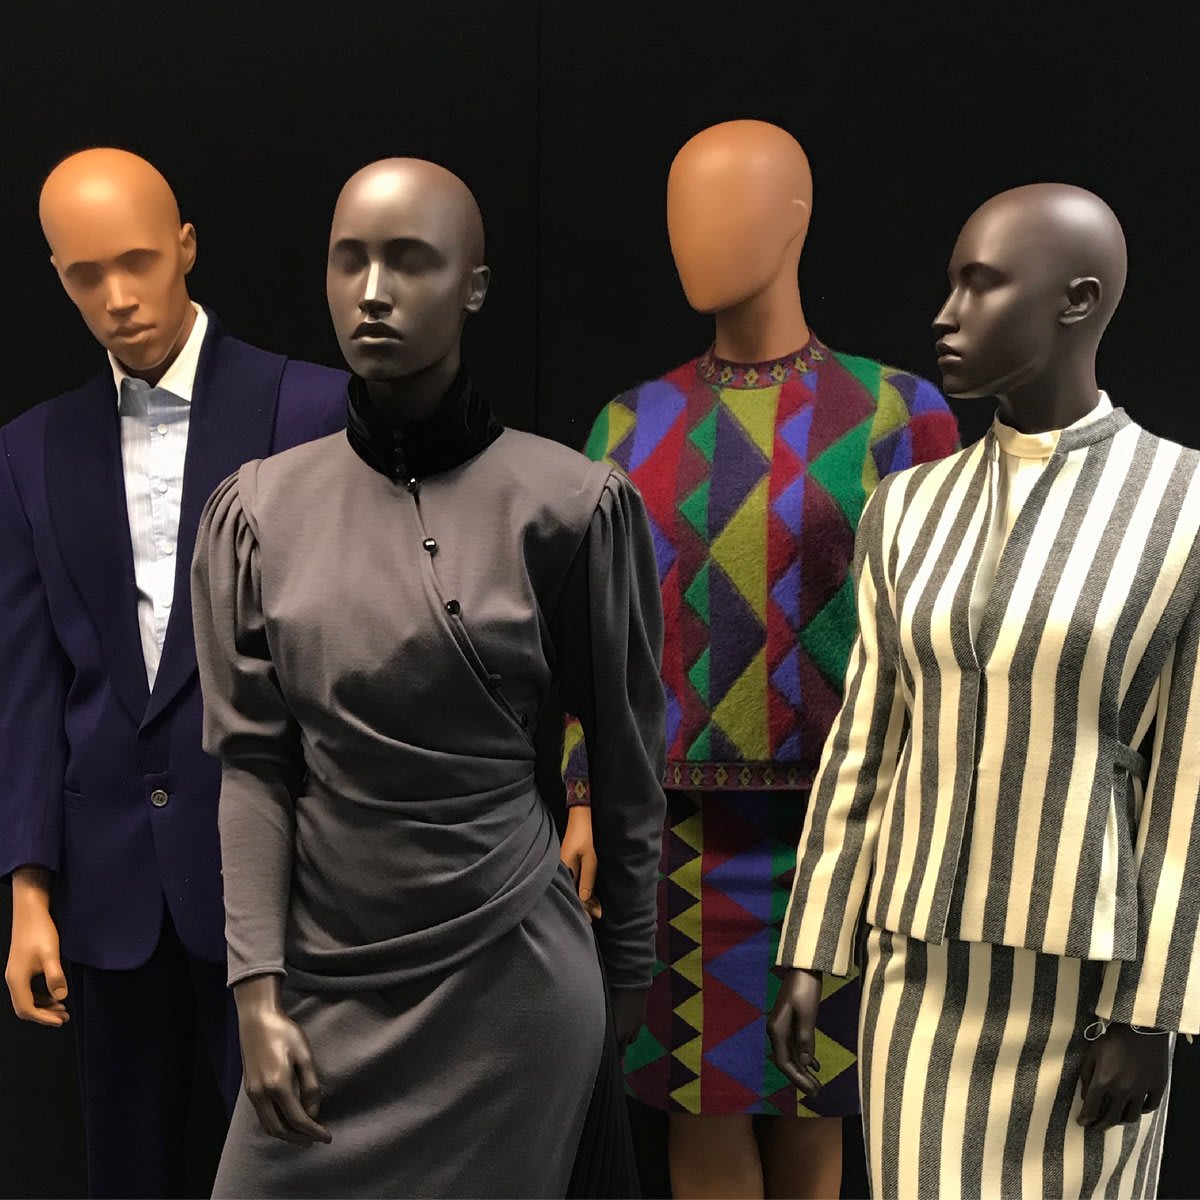 New mannequin alert! The 4 new ethnically diverse mannequins represent a more expansive demographic and begin to fill the huge gap in representation